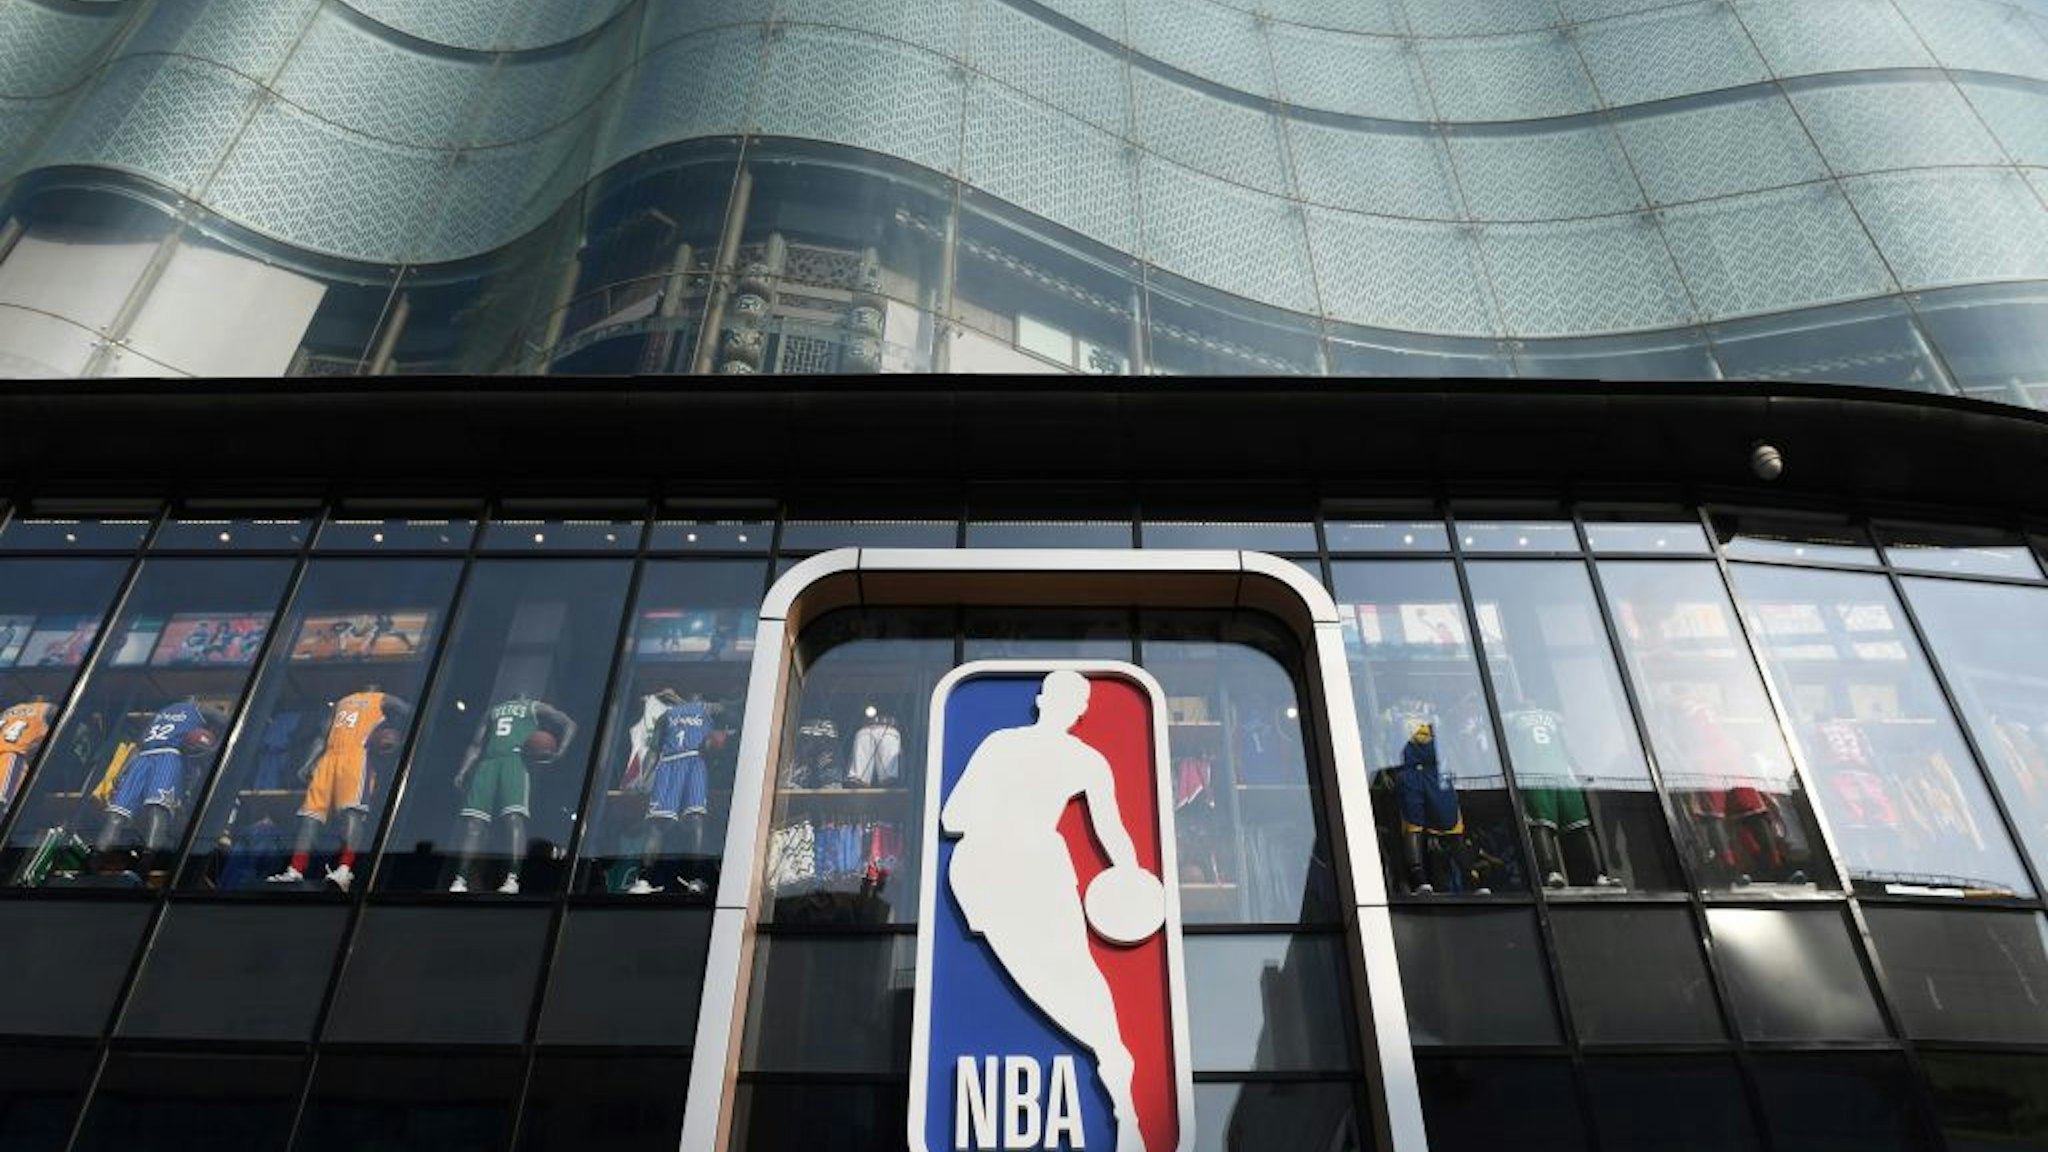 The National Basketball Association (NBA) store is seen in Beijing on October 9, 2019. - Chinese state media slammed the NBA for an "about-face" on October 9 after the body said it would not apologise for a tweet by the Houston Rockets General Manager supporting pro-democracy protests in Hong Kong.